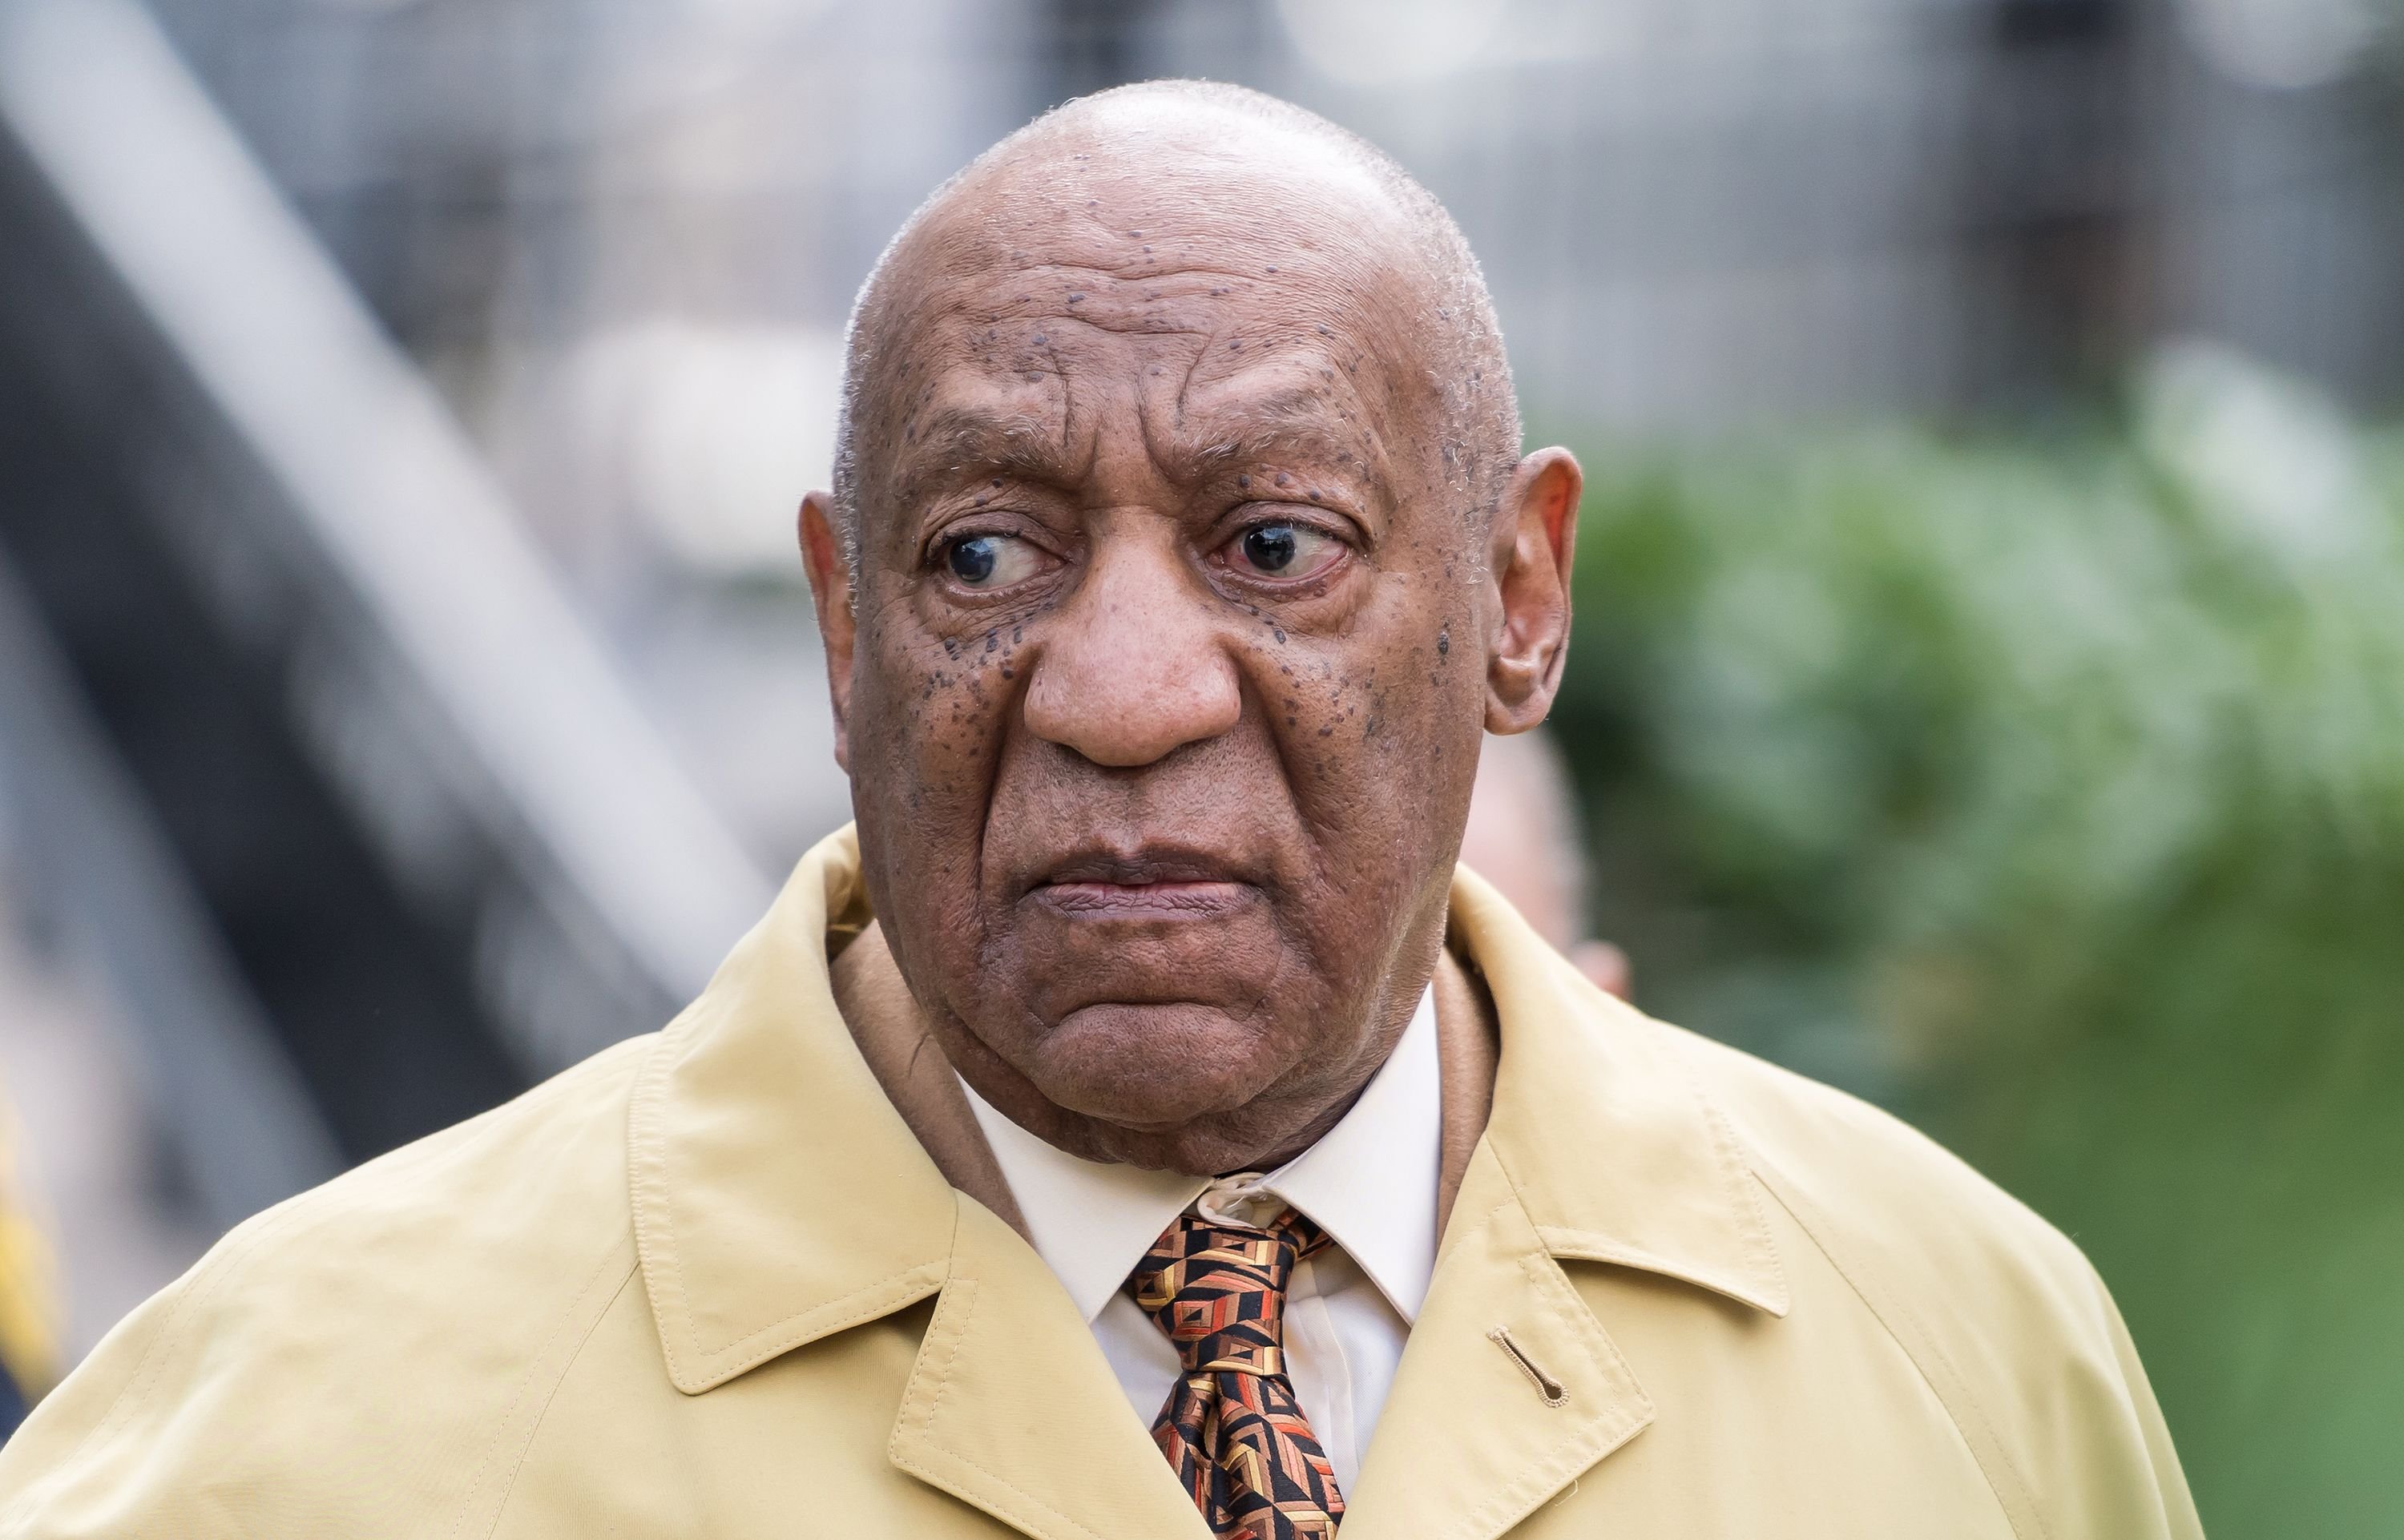 Bill Cosby leaving the Montgomery County Courthouse after a hearing on February 27, 2017 in Norristown, Pennsylvania | Source: Getty Images